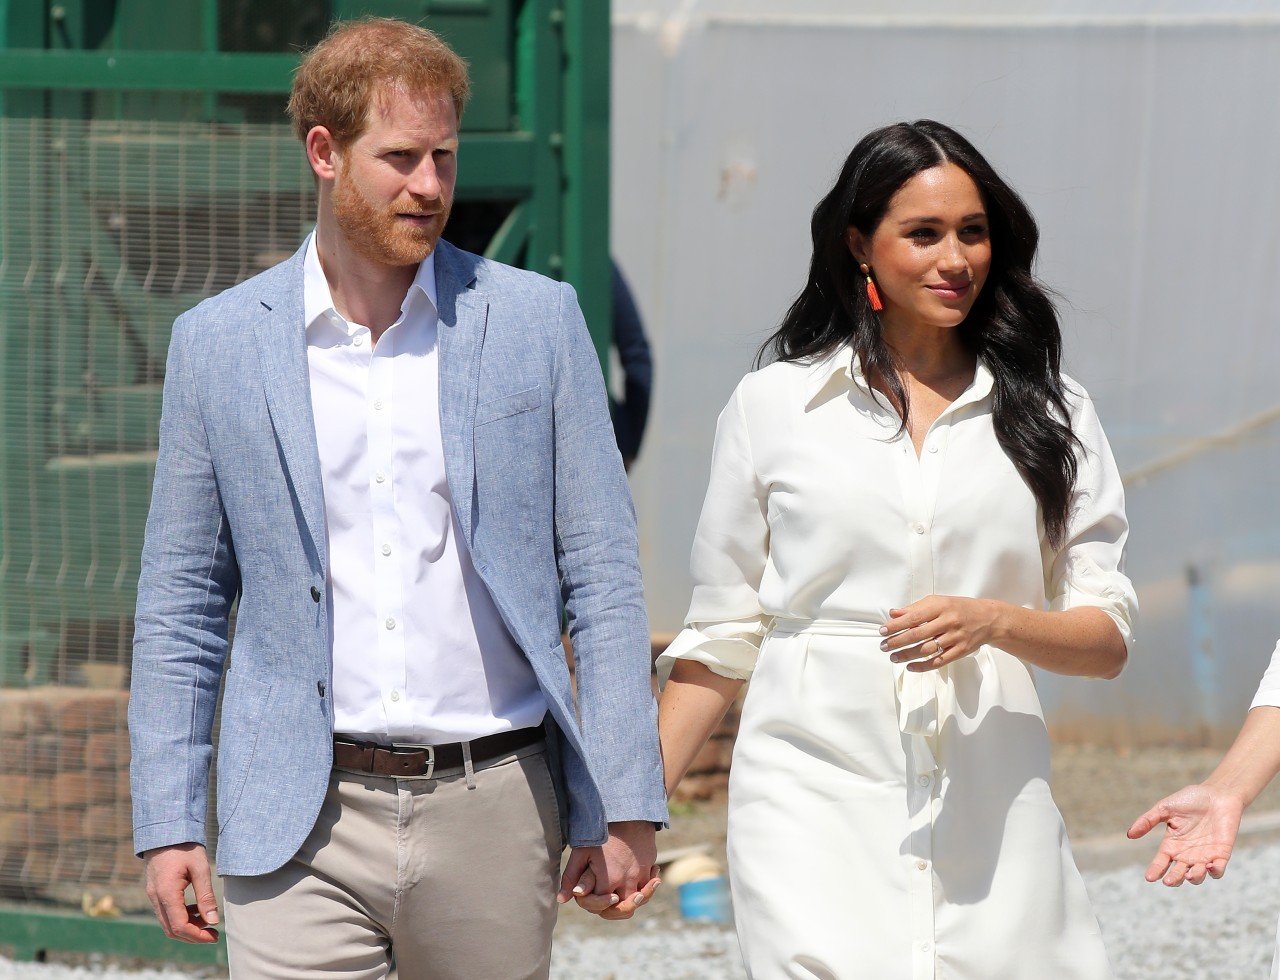 Body Language Expert Points Out Fake Clip in Prince Harry and Meghan Markle Documentary